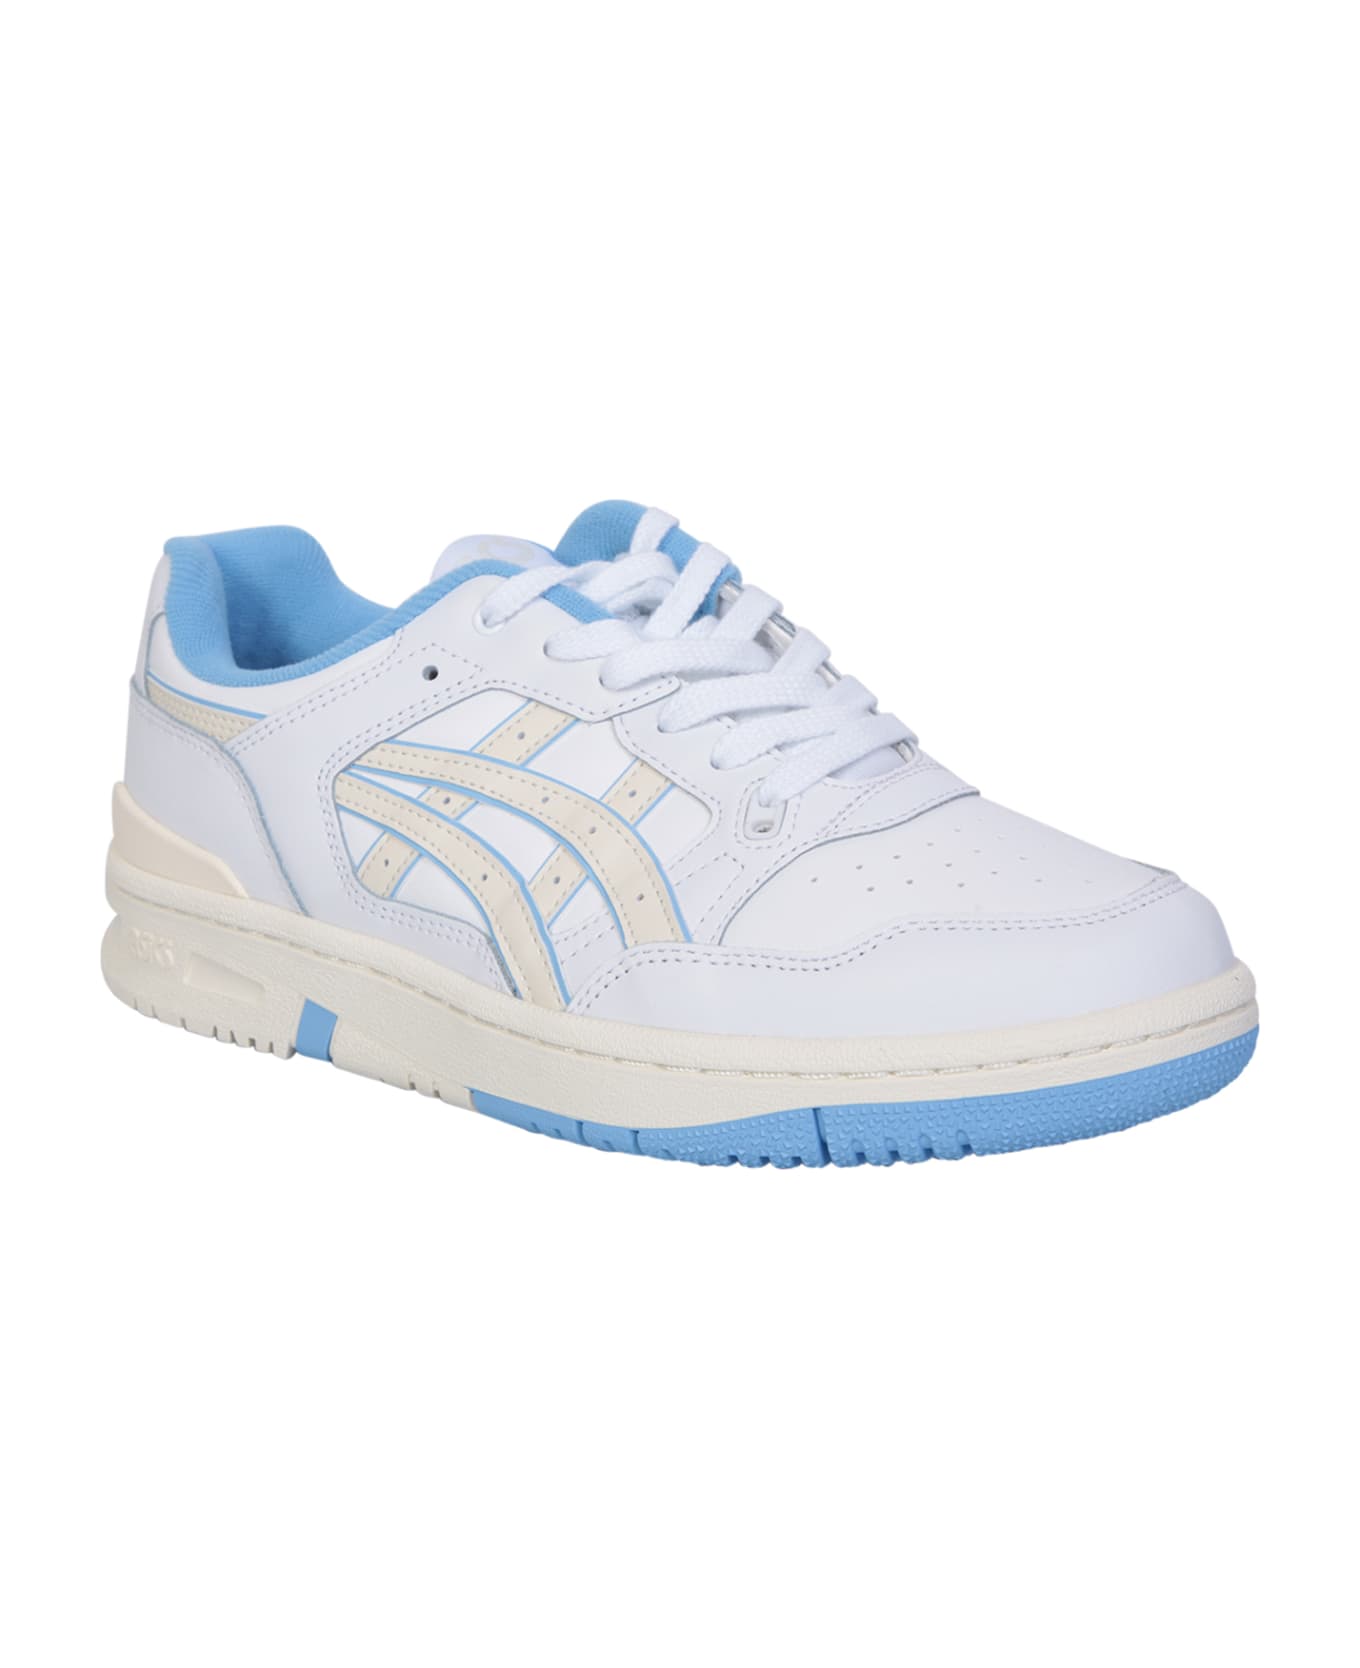 Asics White And Light Blue Ex89 Sneakers - White